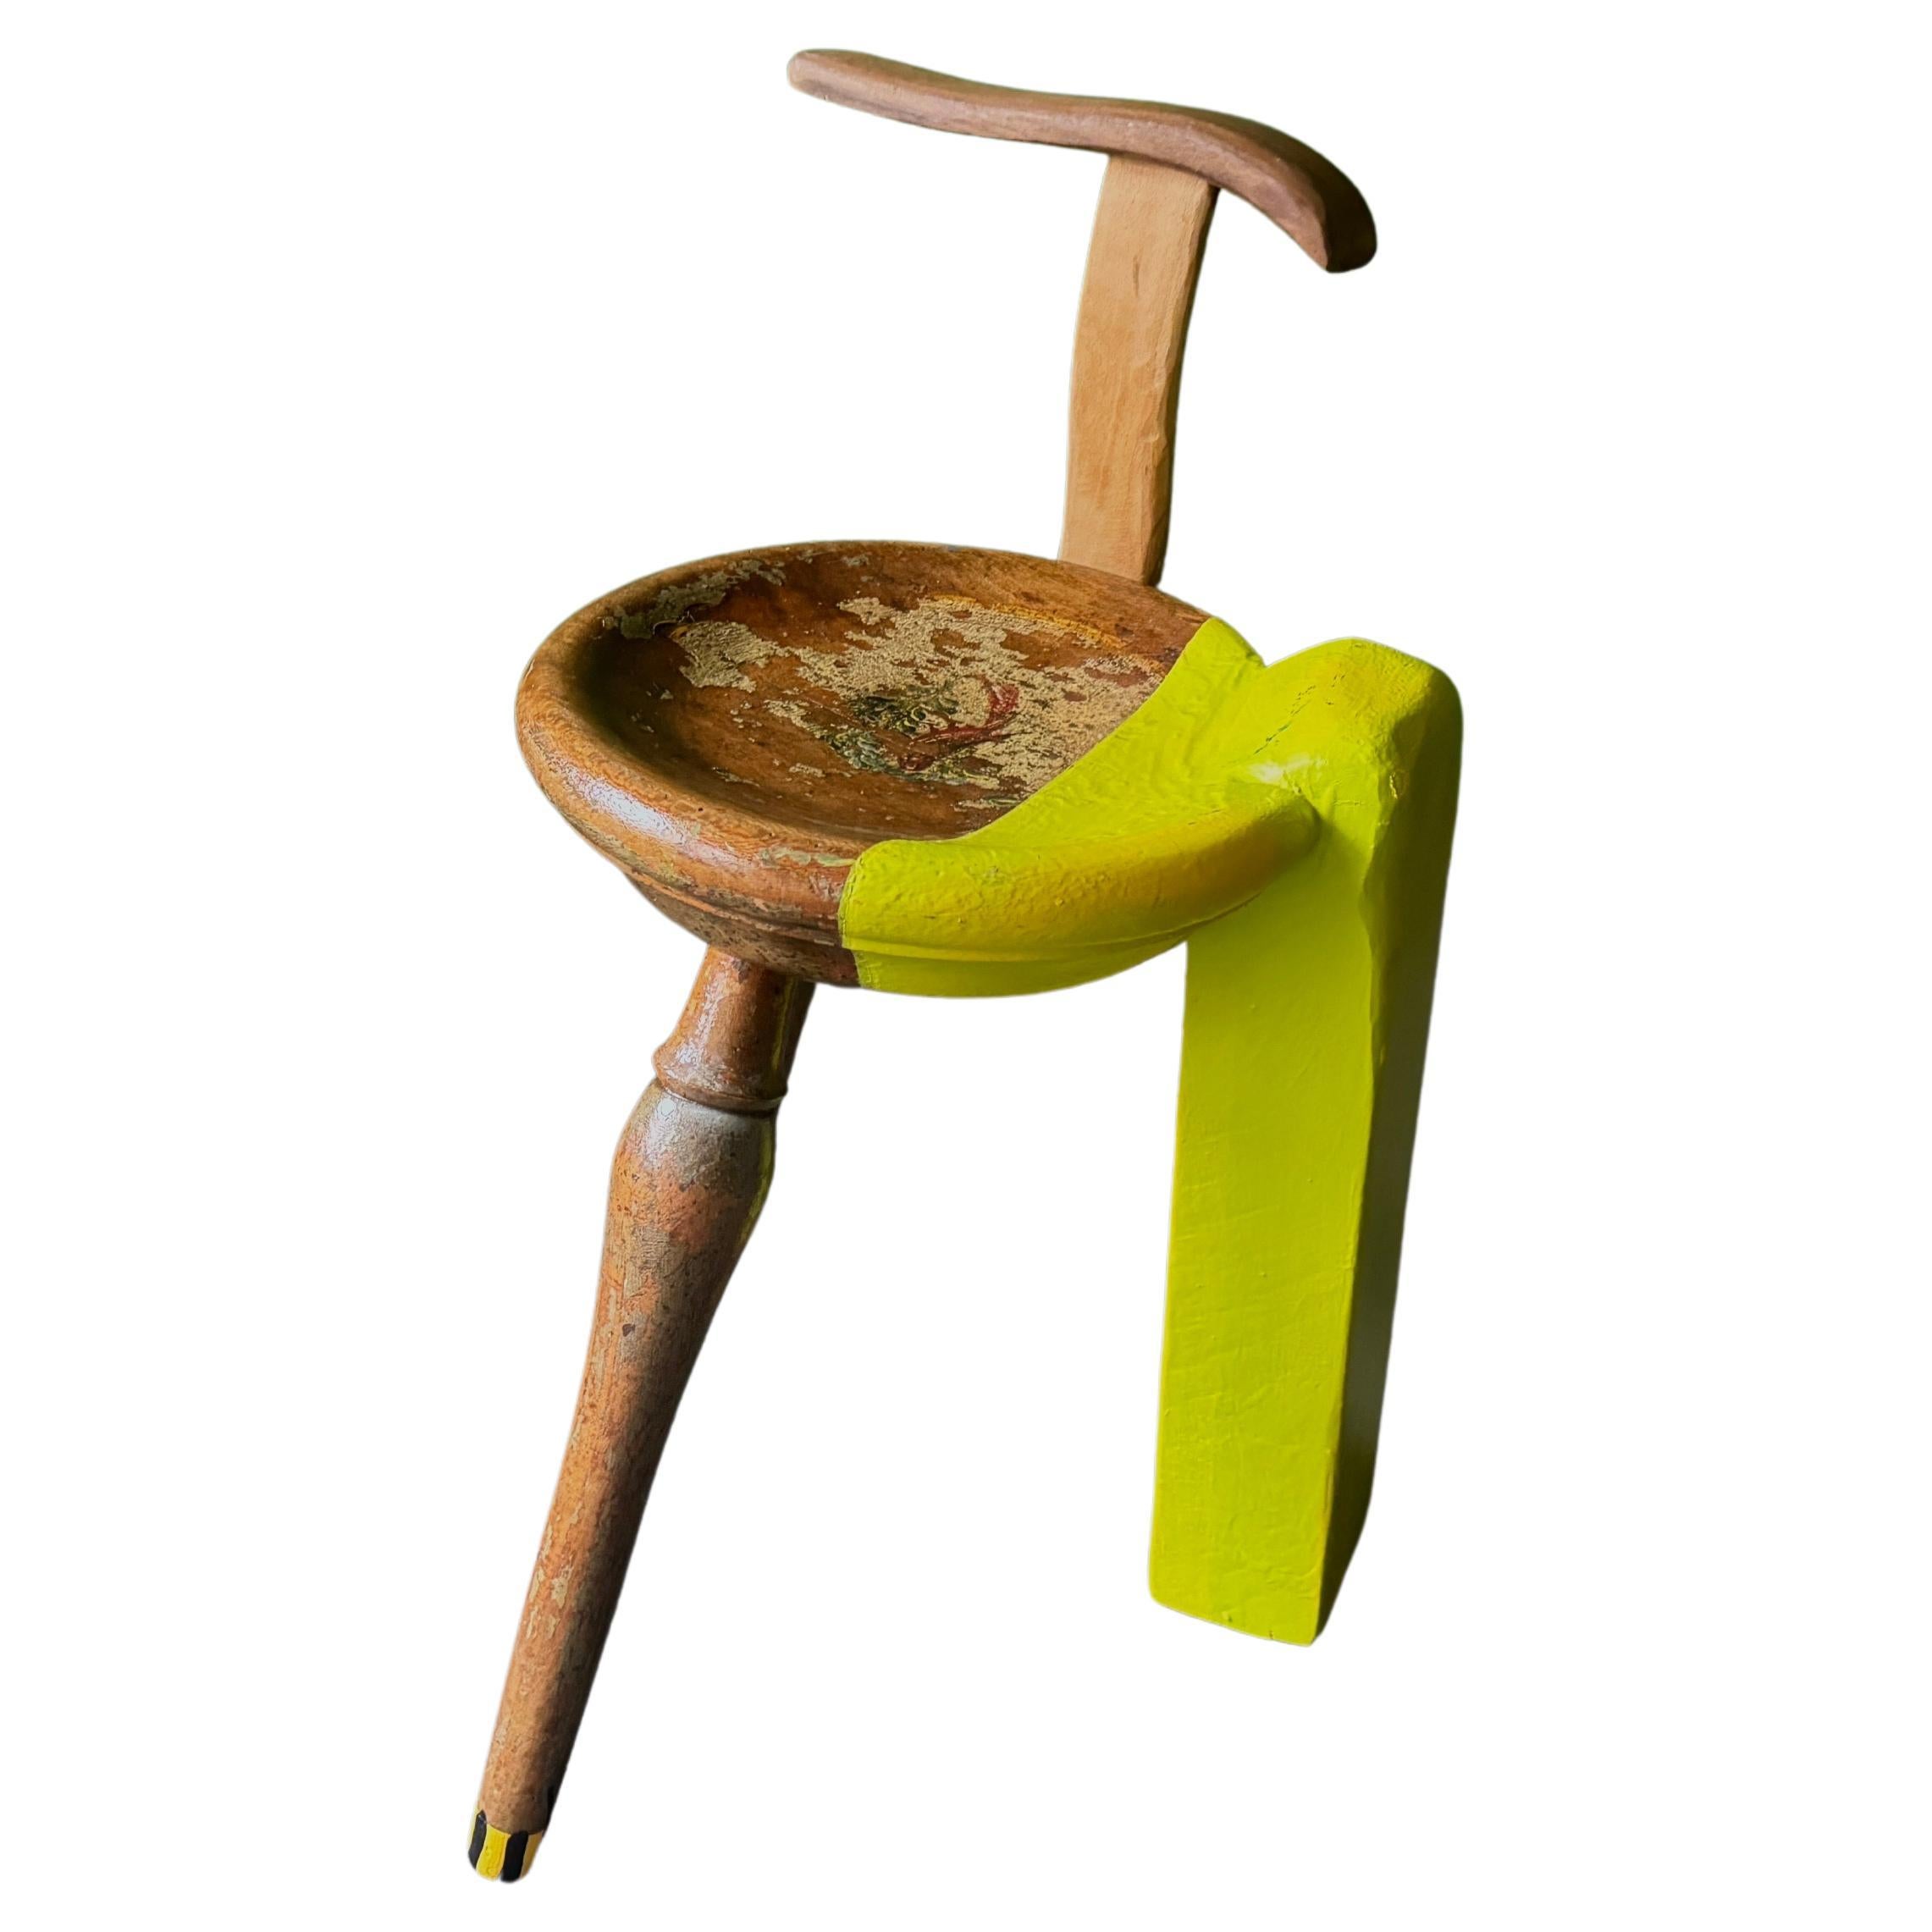 Reality bites stool by Markus Friedrich Staab For Sale